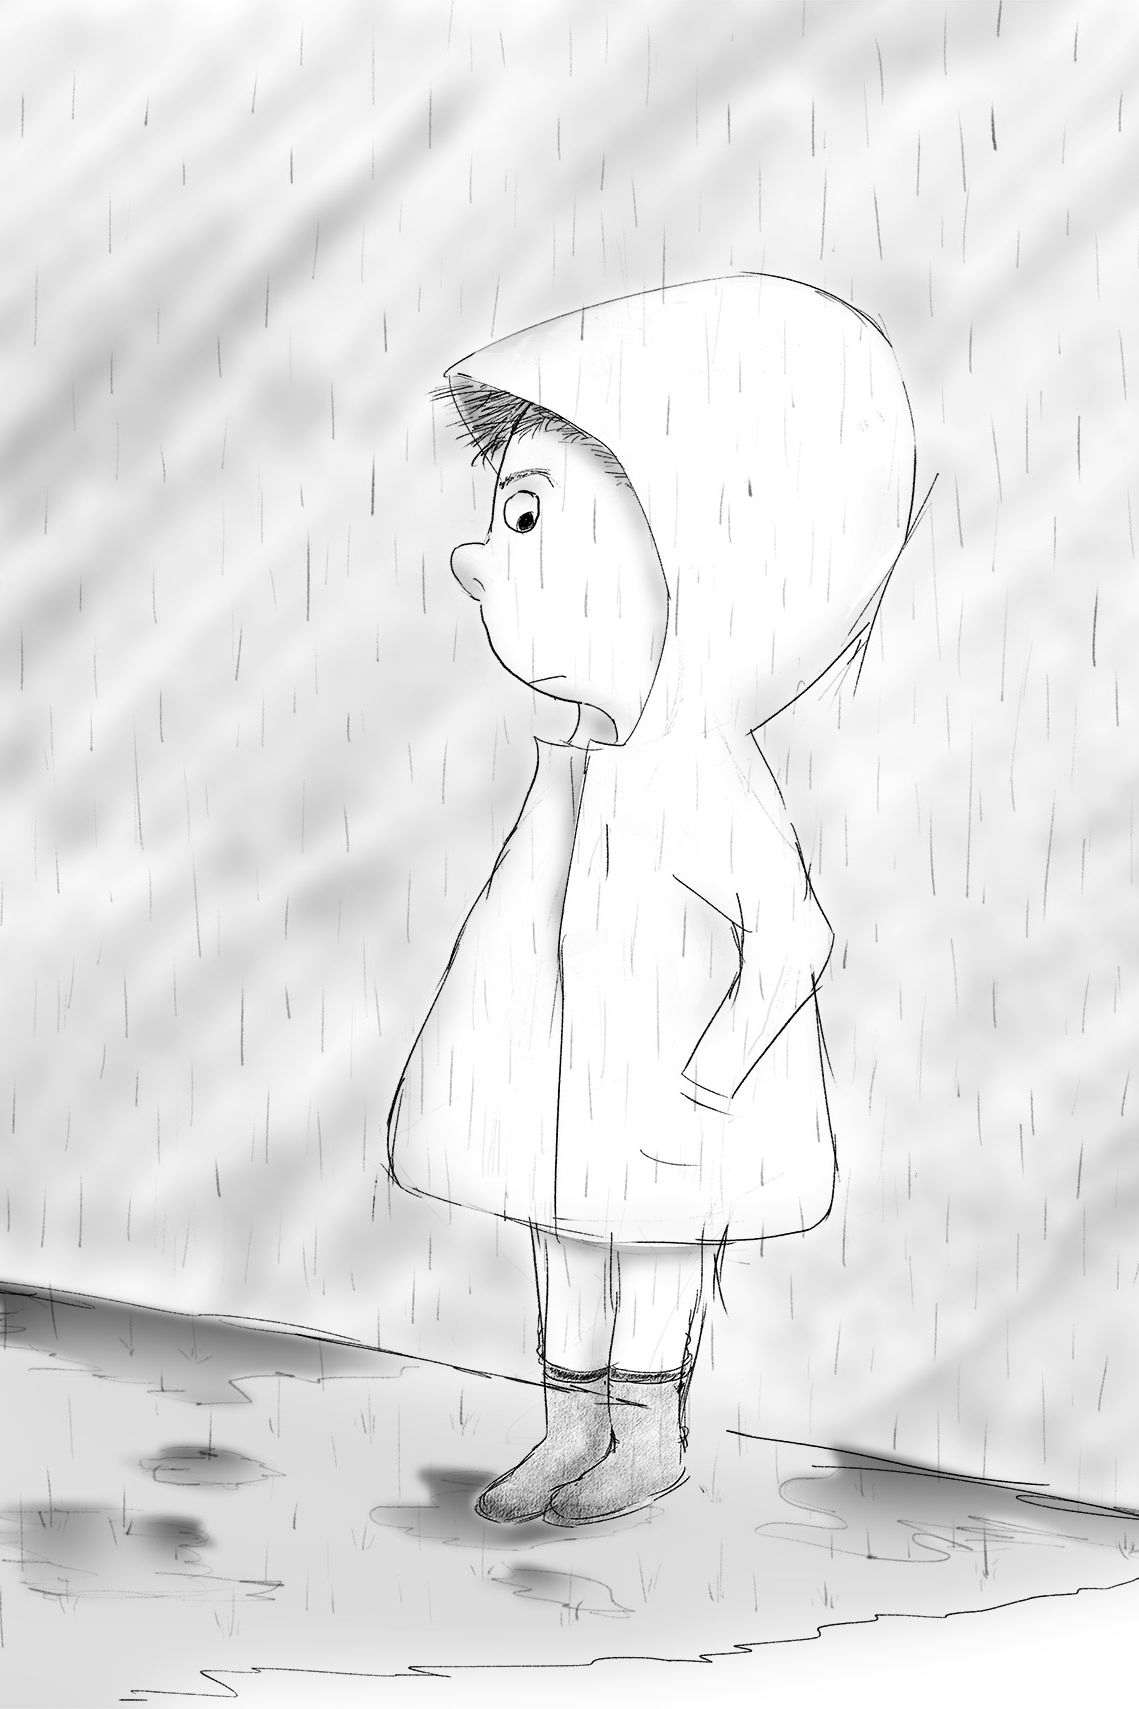 Rainy day, sunny day, boy character sketch illustration by Xavier Wendling